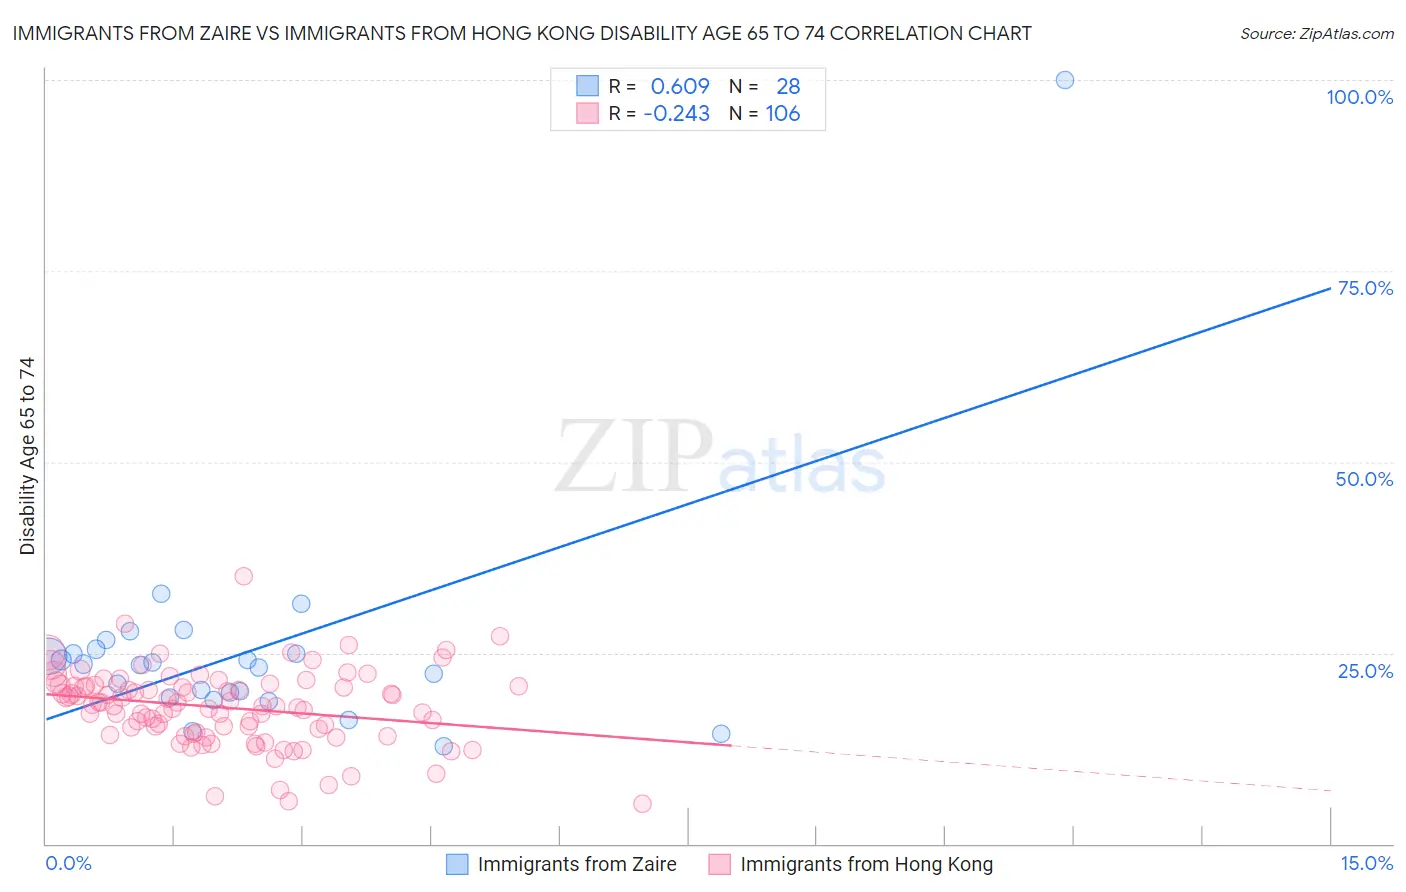 Immigrants from Zaire vs Immigrants from Hong Kong Disability Age 65 to 74